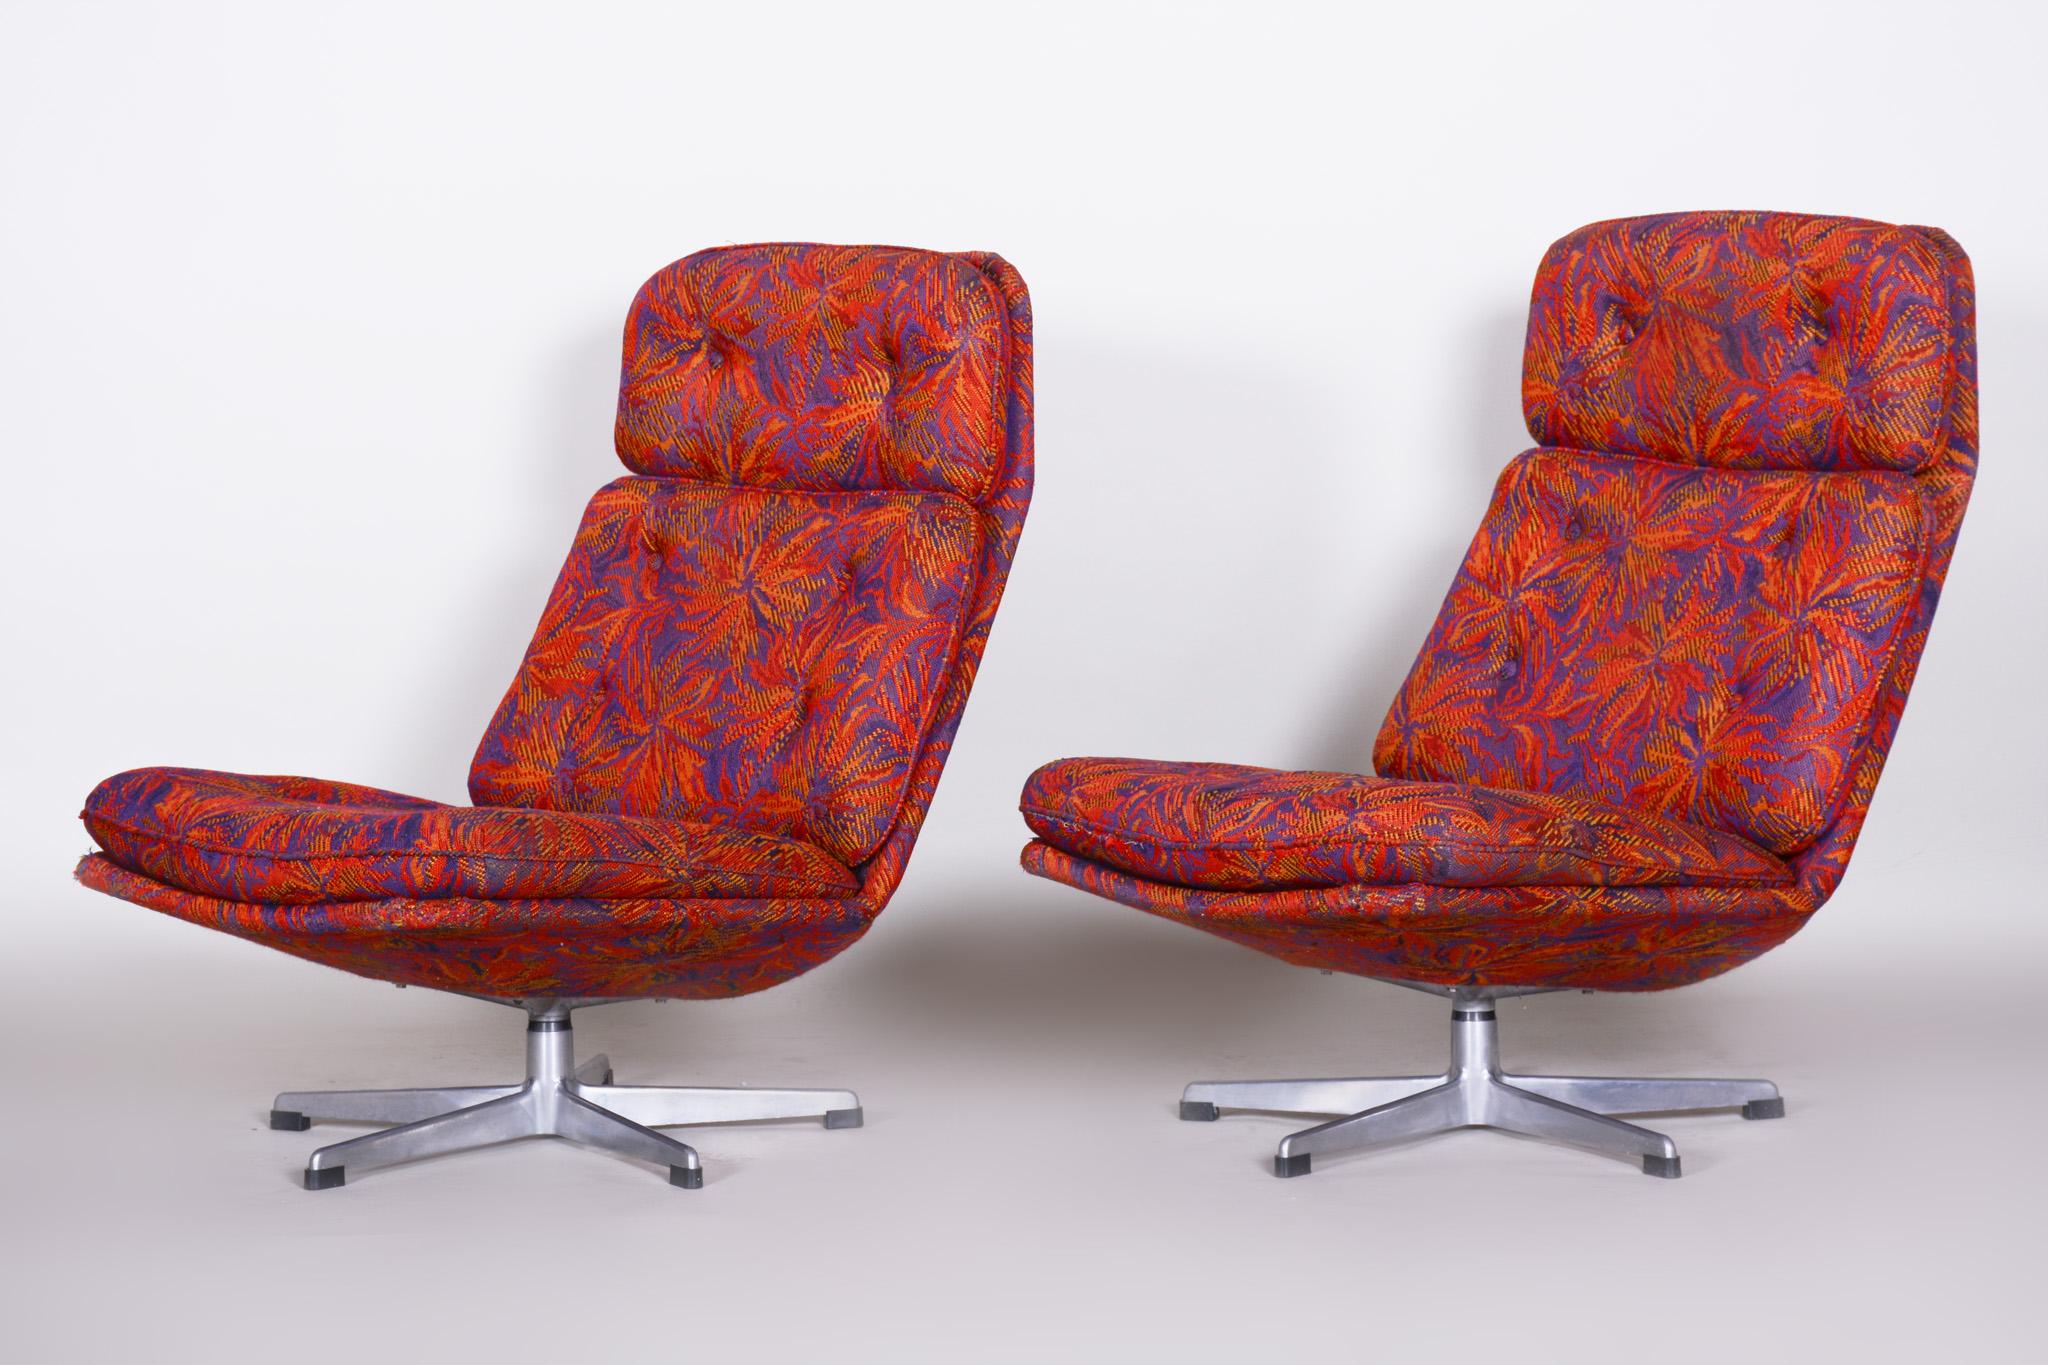 Mid-Century Modern Pair of Czech Red Midcentury Swivel Chairs, Chrome, Original Condition, 1960s